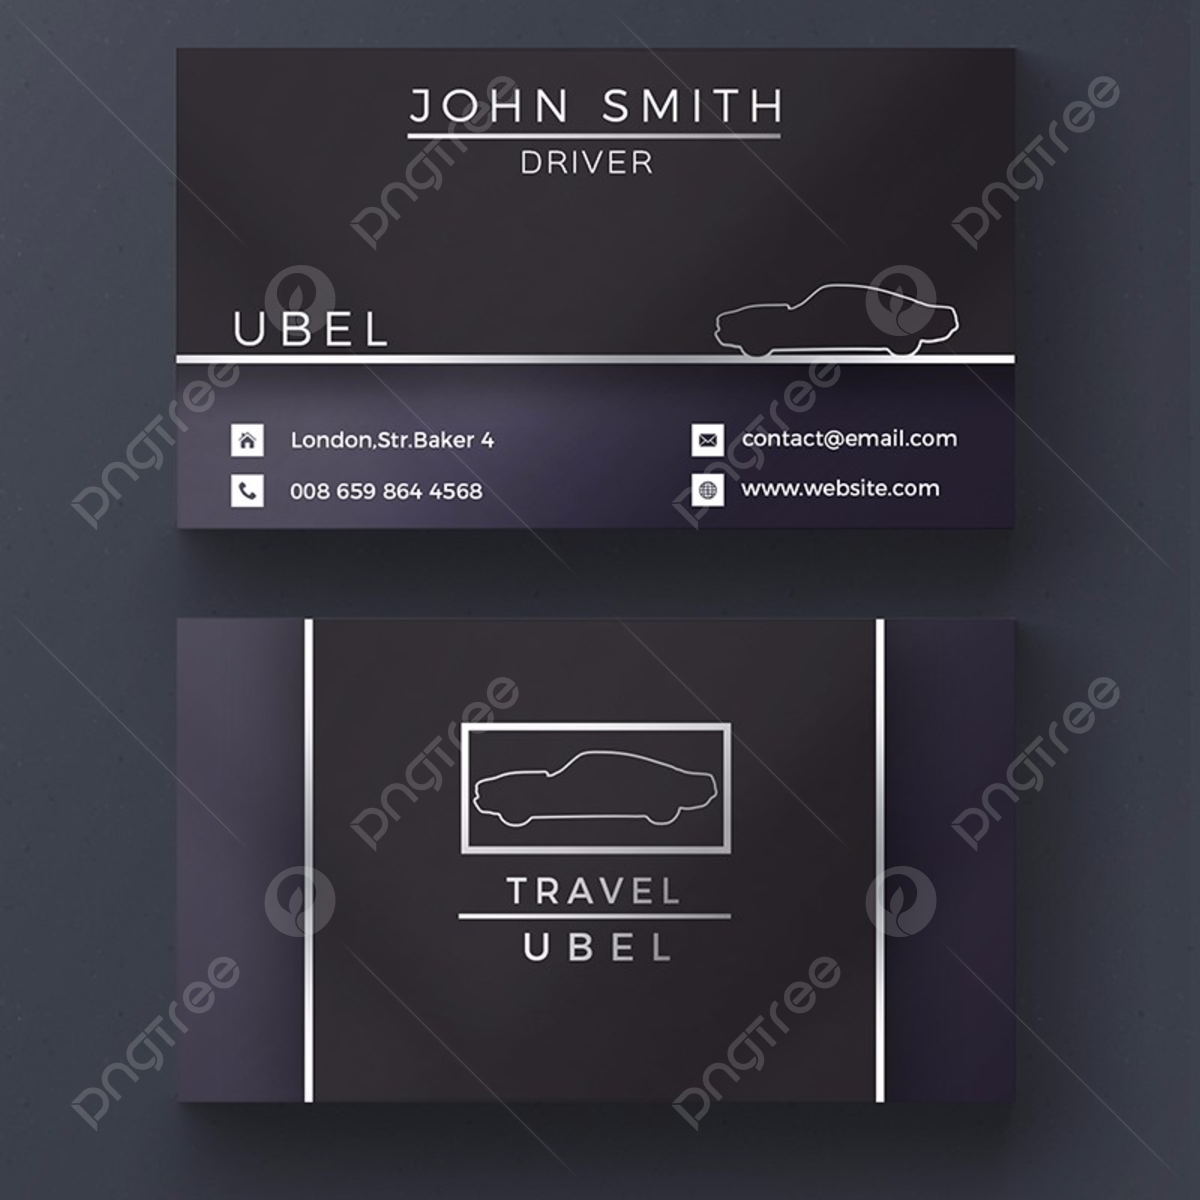 uber business cards 11